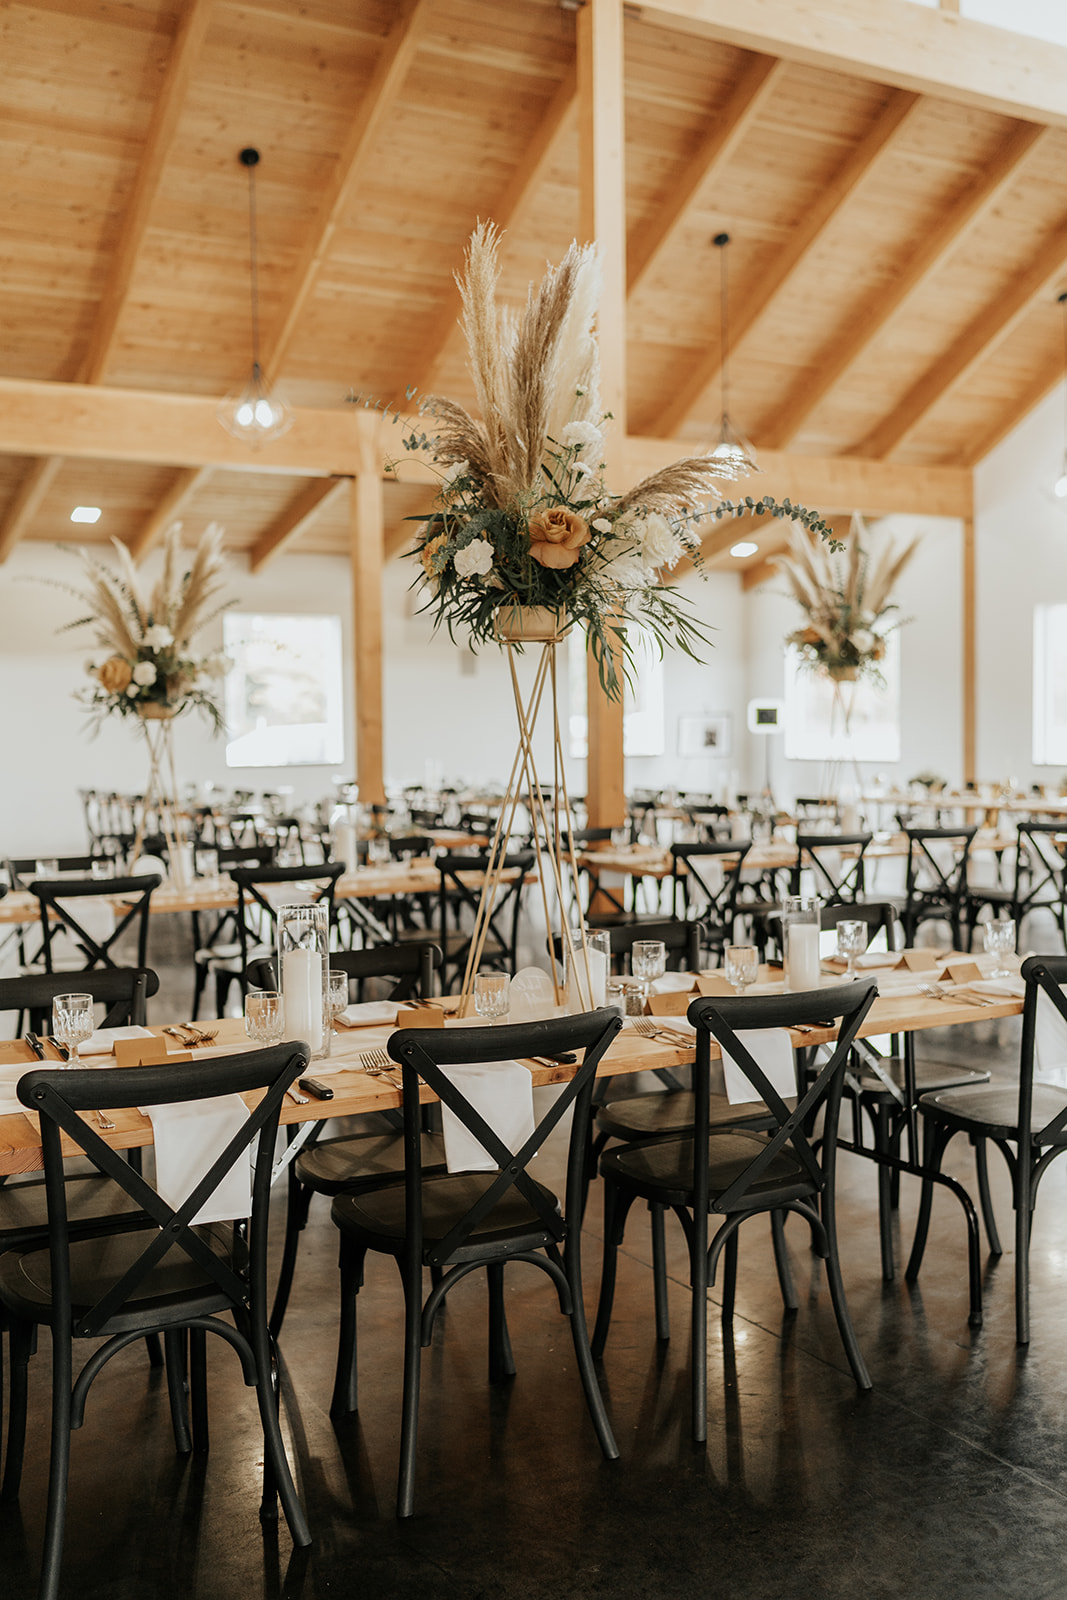 Elegant wedding reception hall with wooden tables, black chairs, and tall floral centerpieces under a wooden beam ceiling.